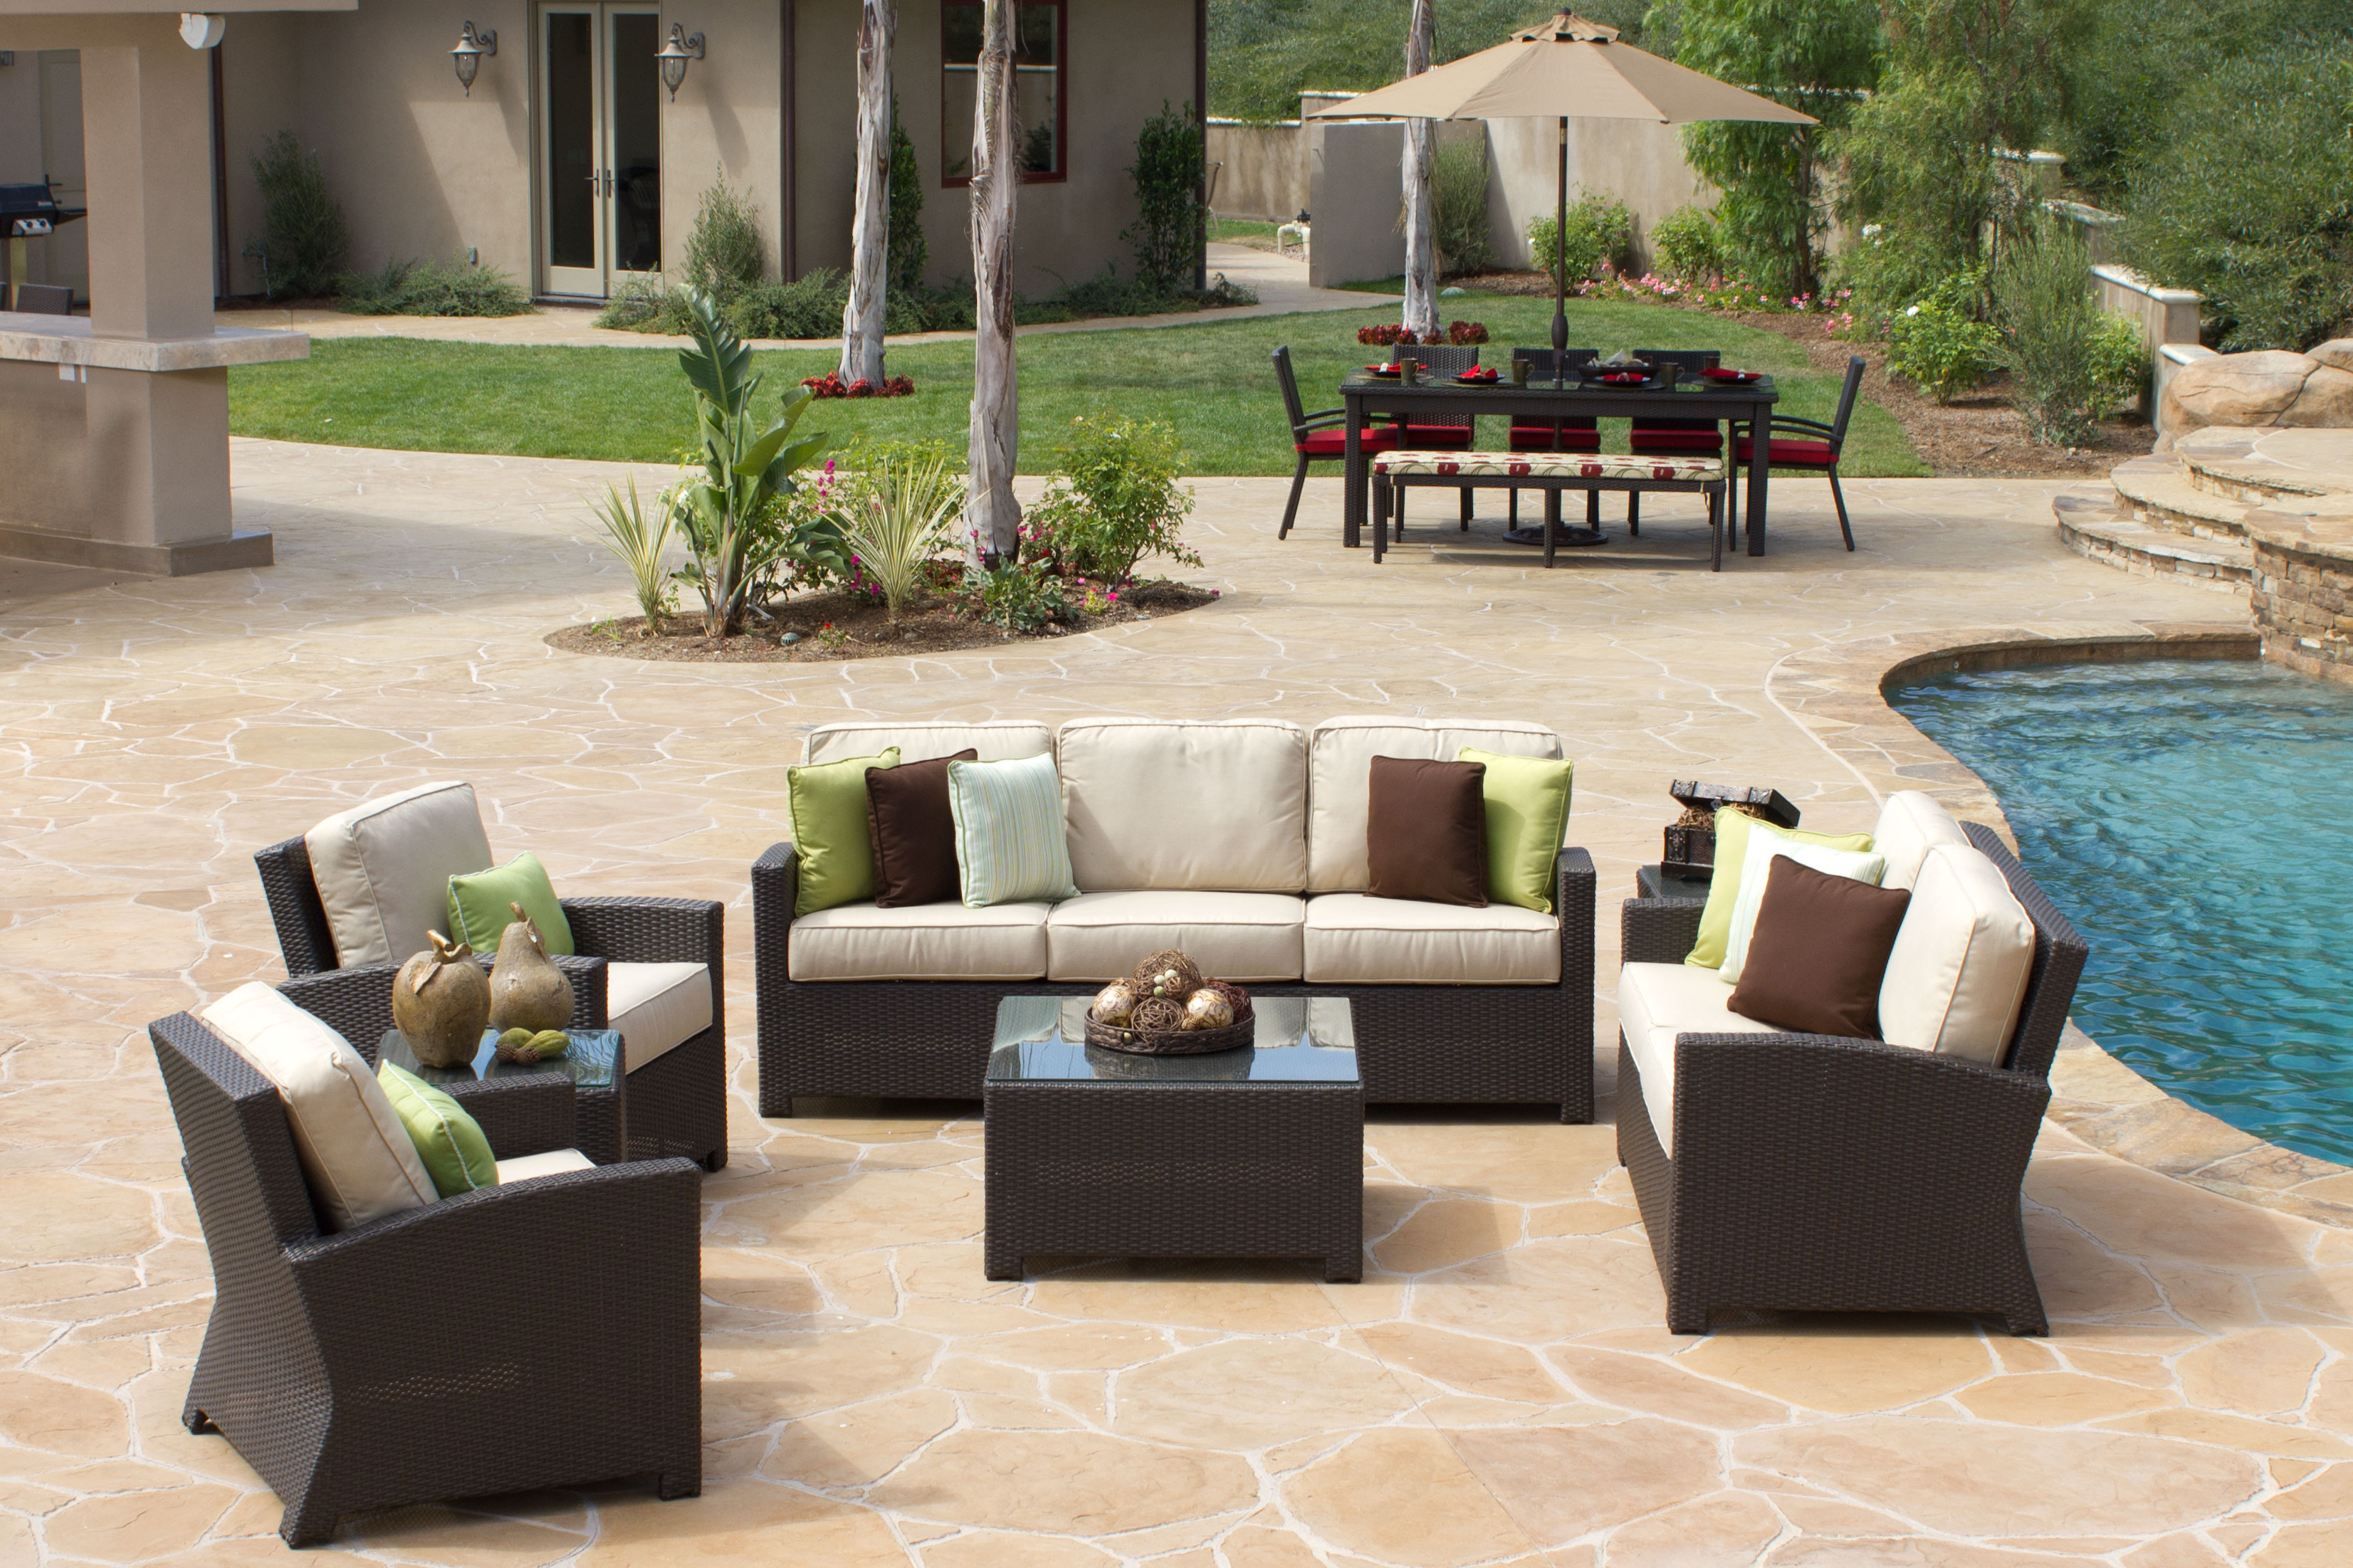 Venice Commercial Outdoor Furniture at Low Prices! Resort Contract Furnishings